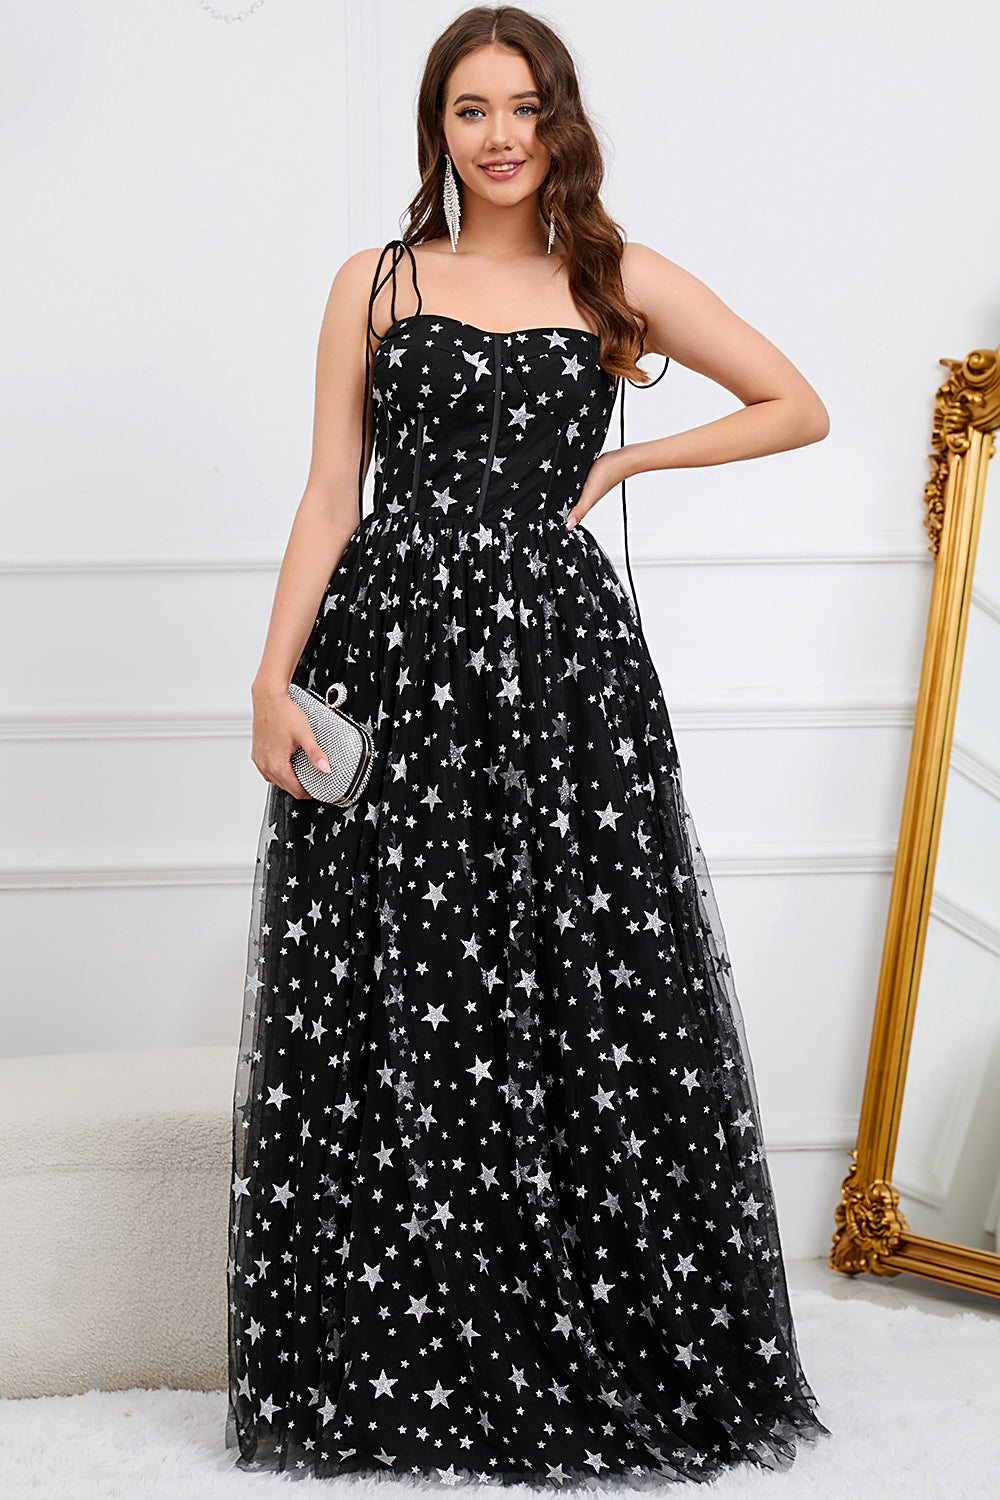 Tulle A-Line Spaghetti Straps Black Long Prom Dress with Stars